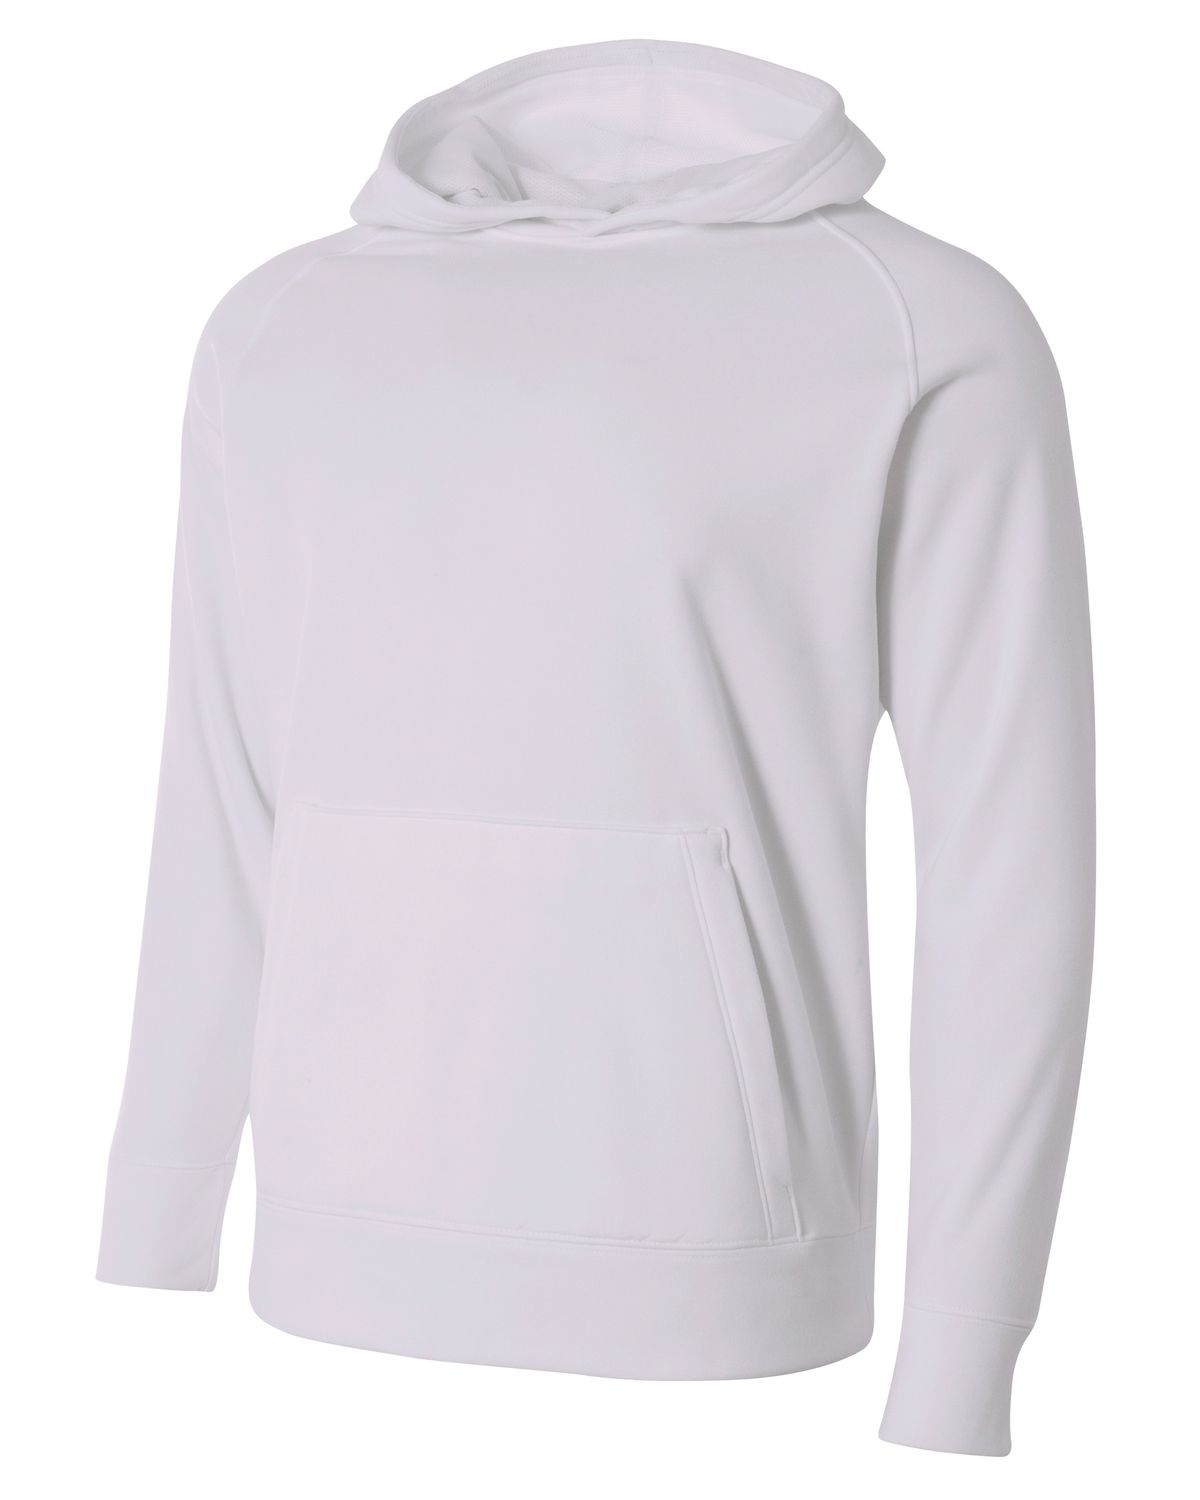 'A4 NB4237 Youth Solid Tech Fleece Pullover Hoodie'